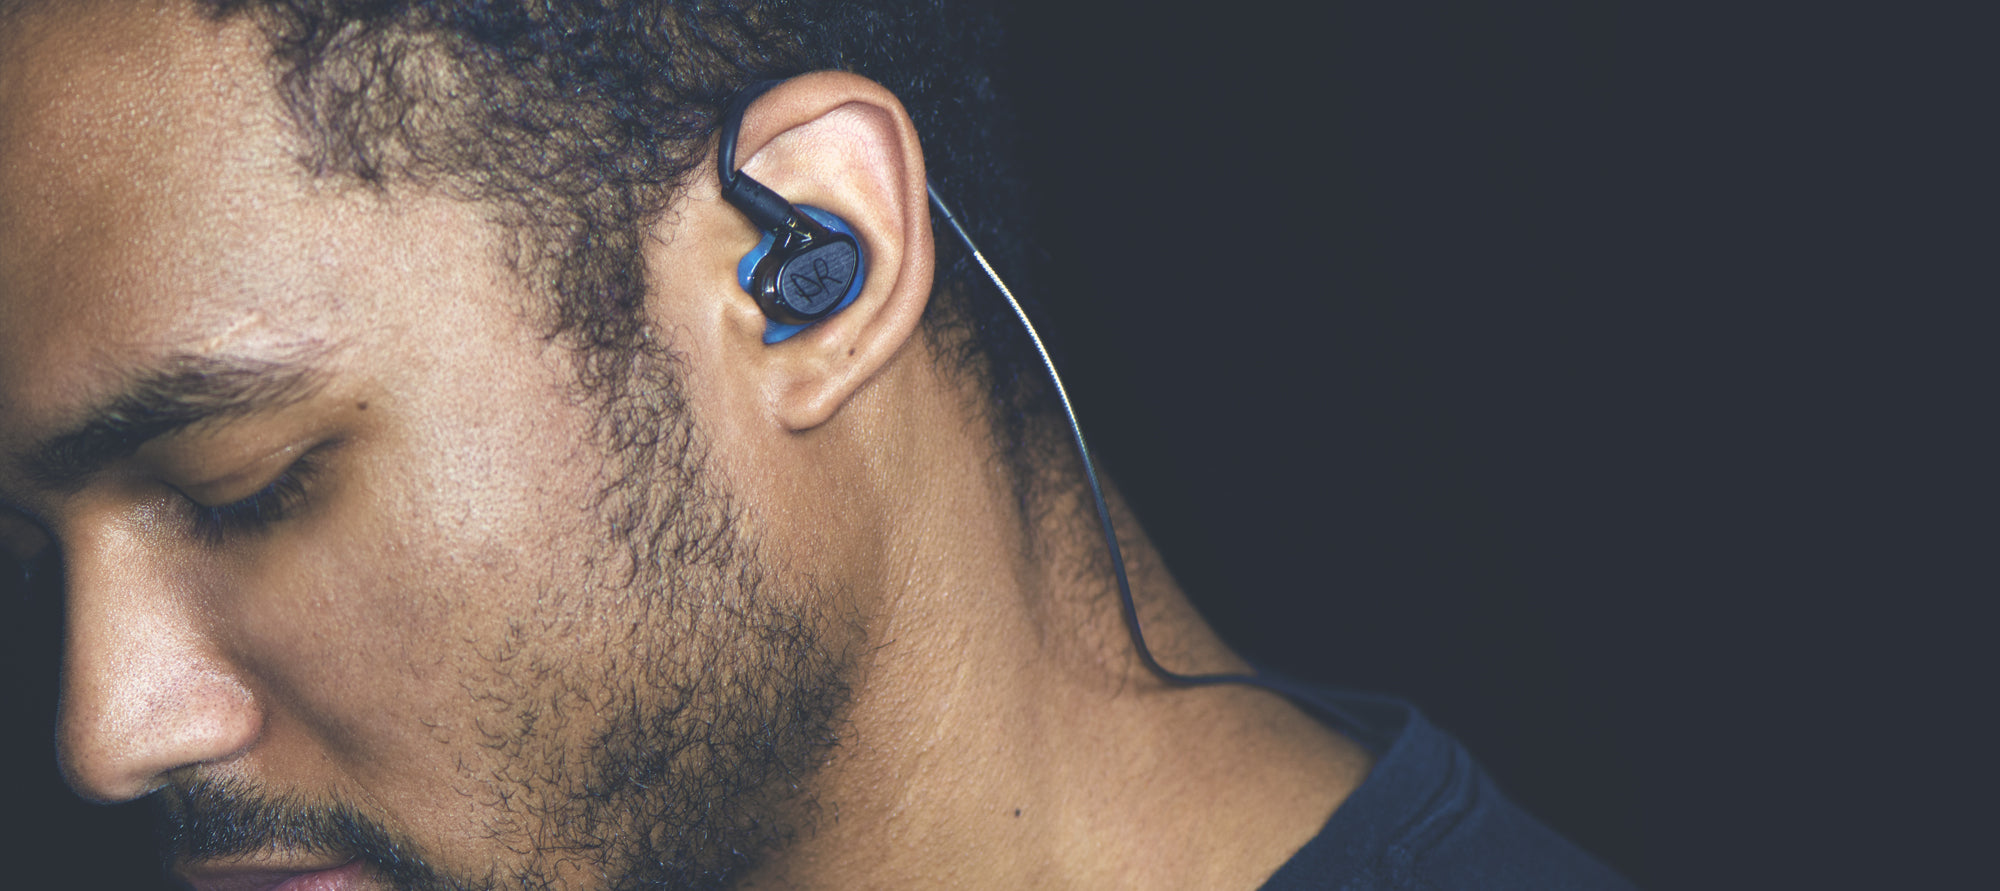 A close-up of a man's side profile showing a wireless earbud in his ear, with his face partially lit against a dark background.